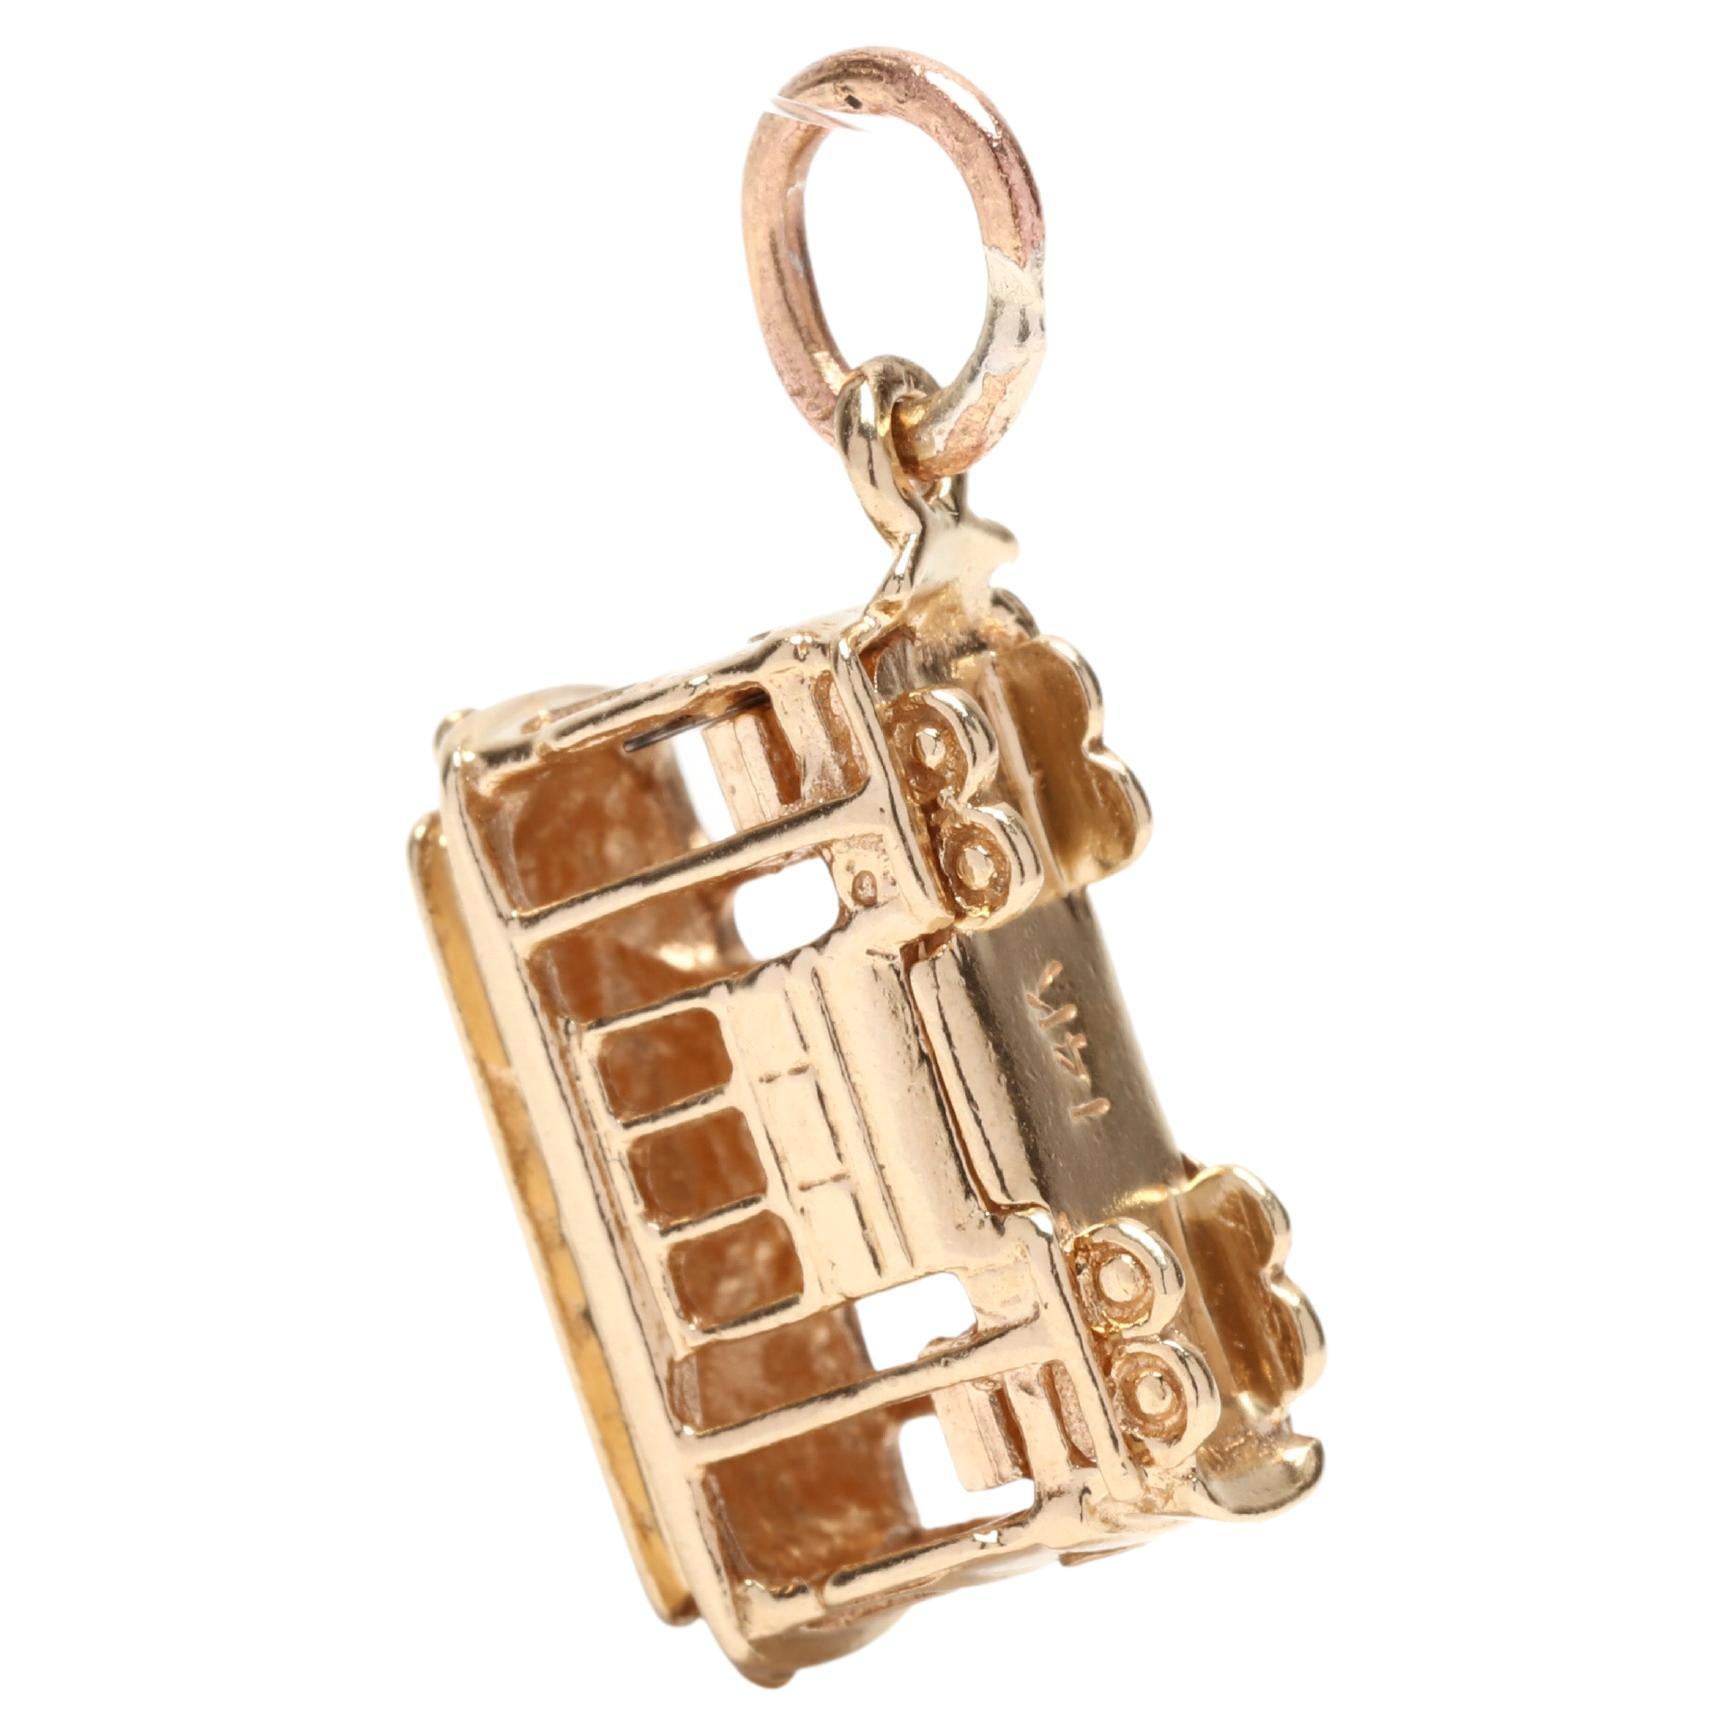 A vintage 14 karat yellow gold cable car charm. This charm features a cable car motif with cut out windows and doors and a thin gold bail.



Length: 3/4 in.



Width: 3/8 in.



Weight: 1.90 dwts.